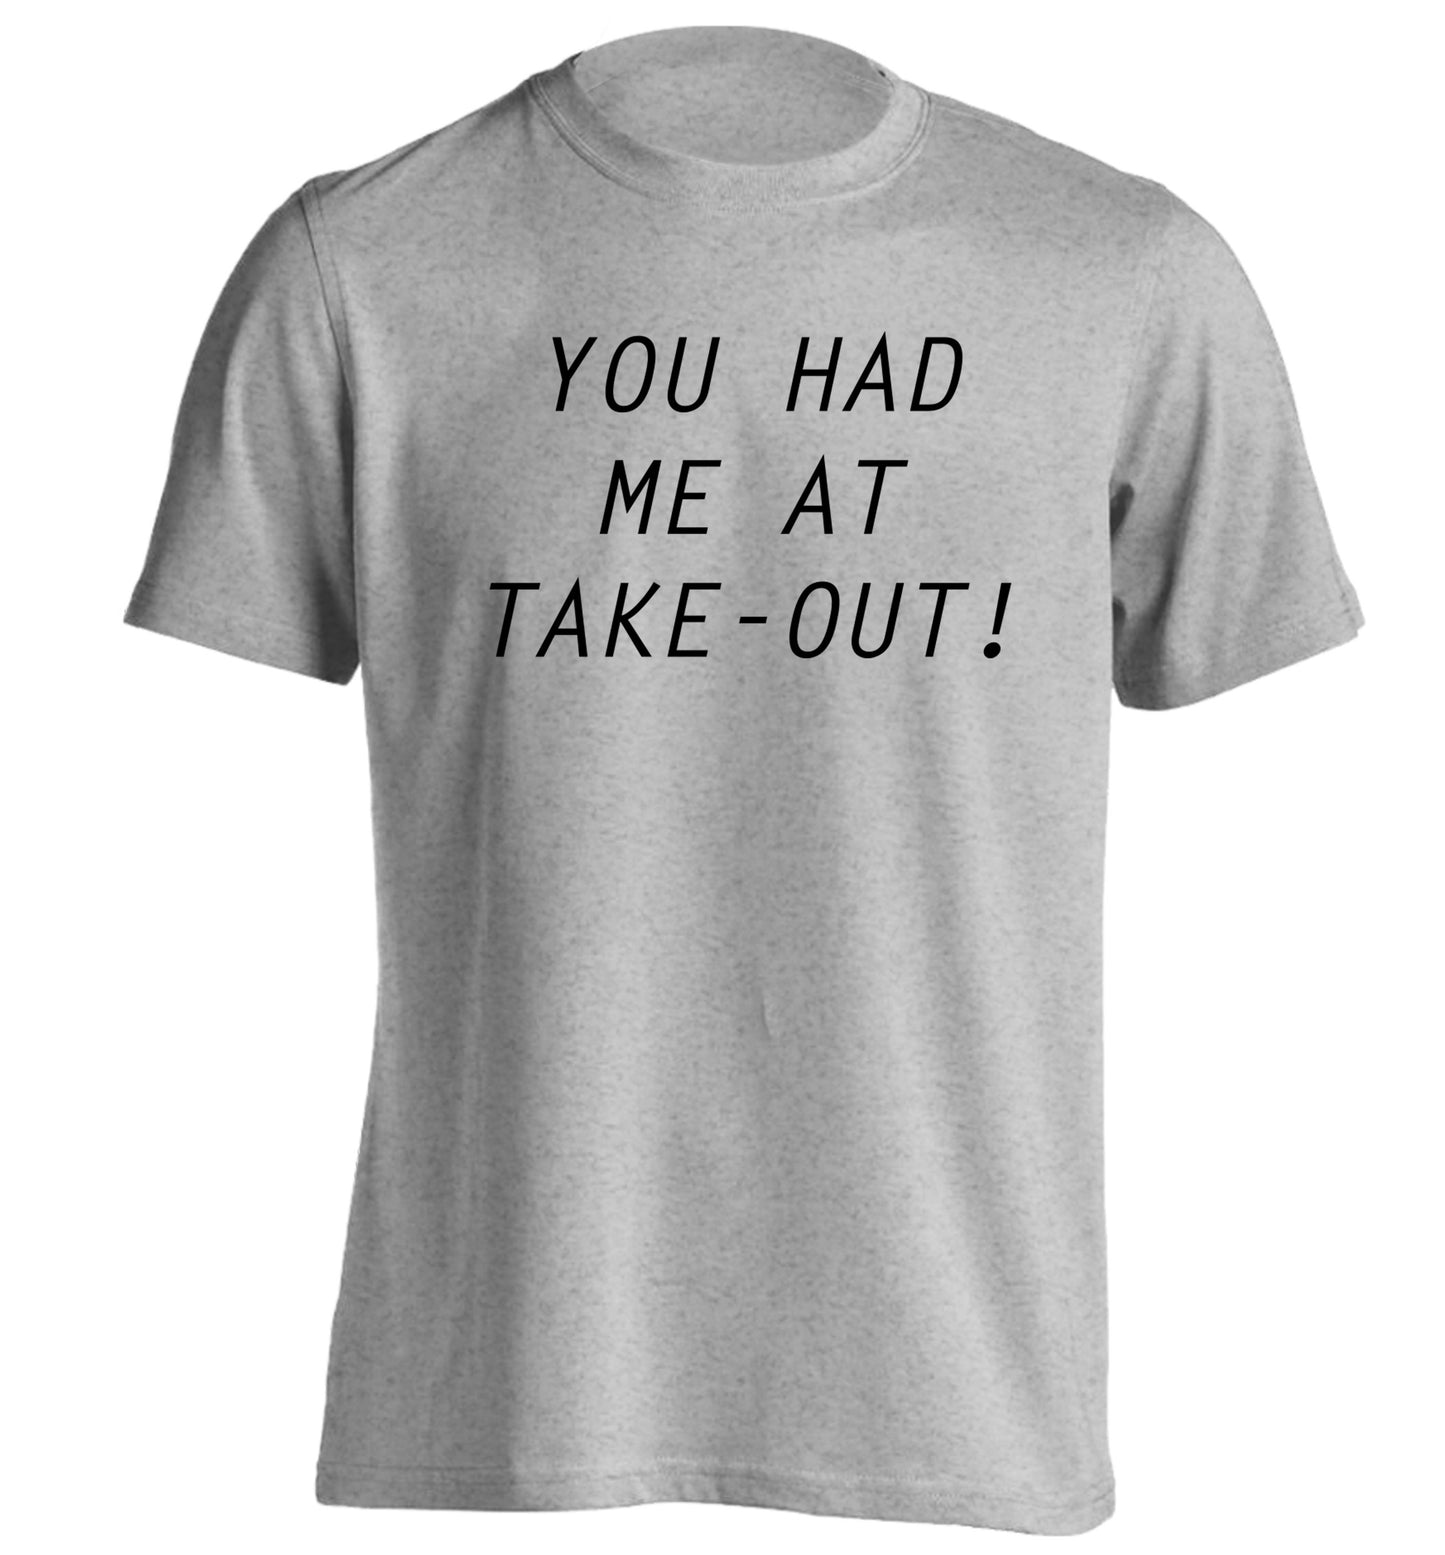 You had me at take-out adults unisex grey Tshirt 2XL